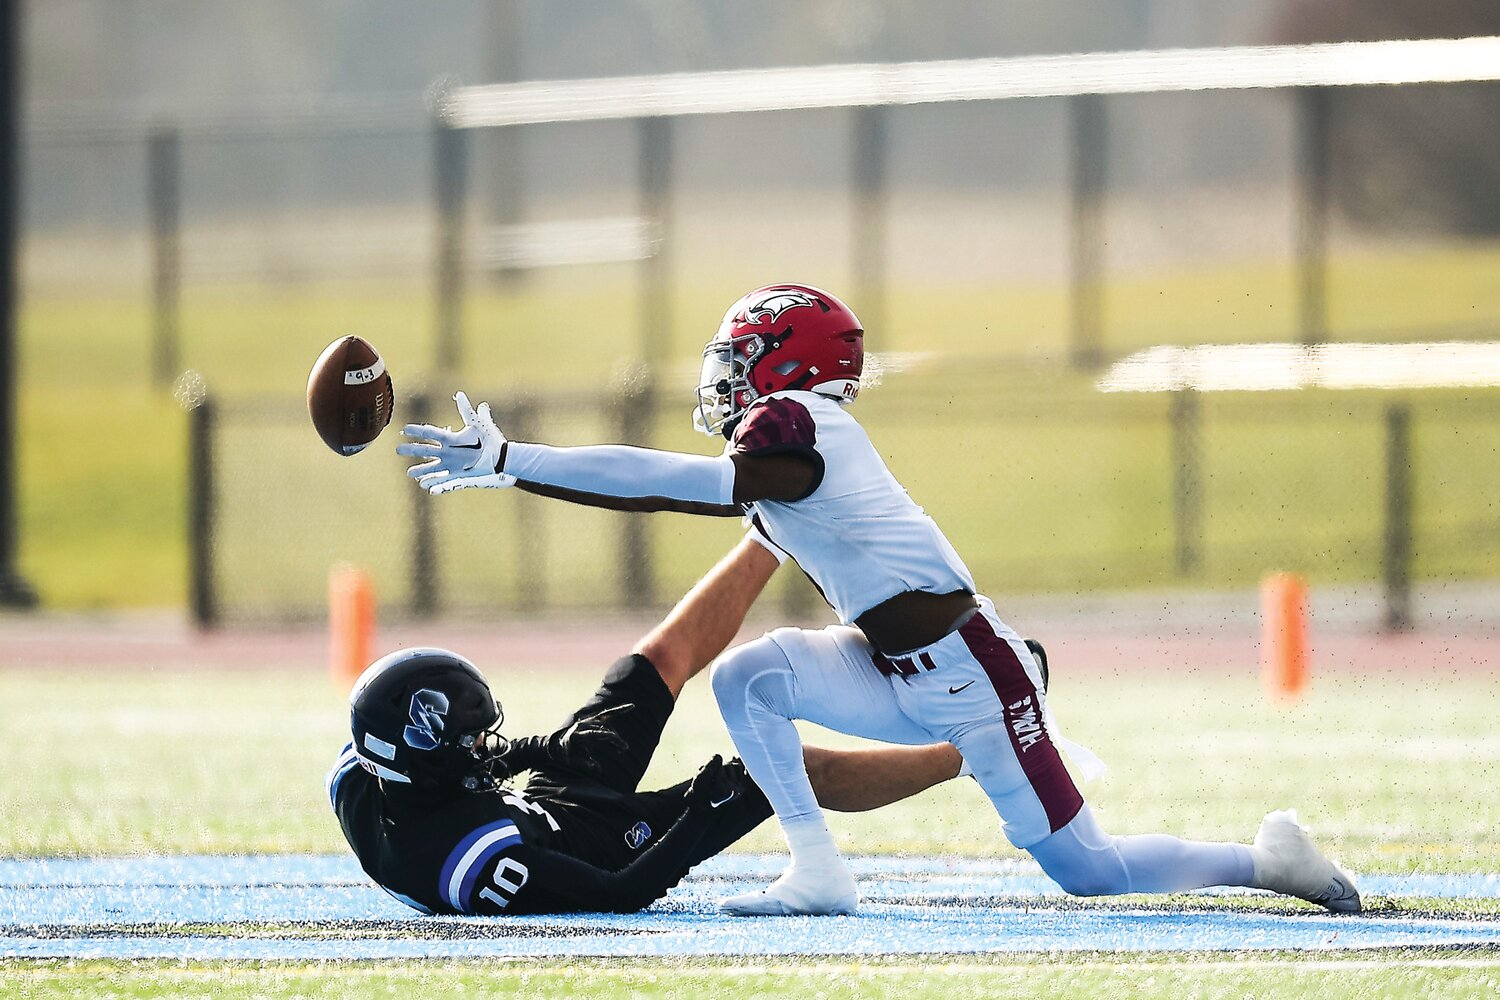 St. Joseph’s Prep’s Omillio Agard makes a diving attempt at an incomplete pass in front of Central Bucks South’s Matt Harmon.